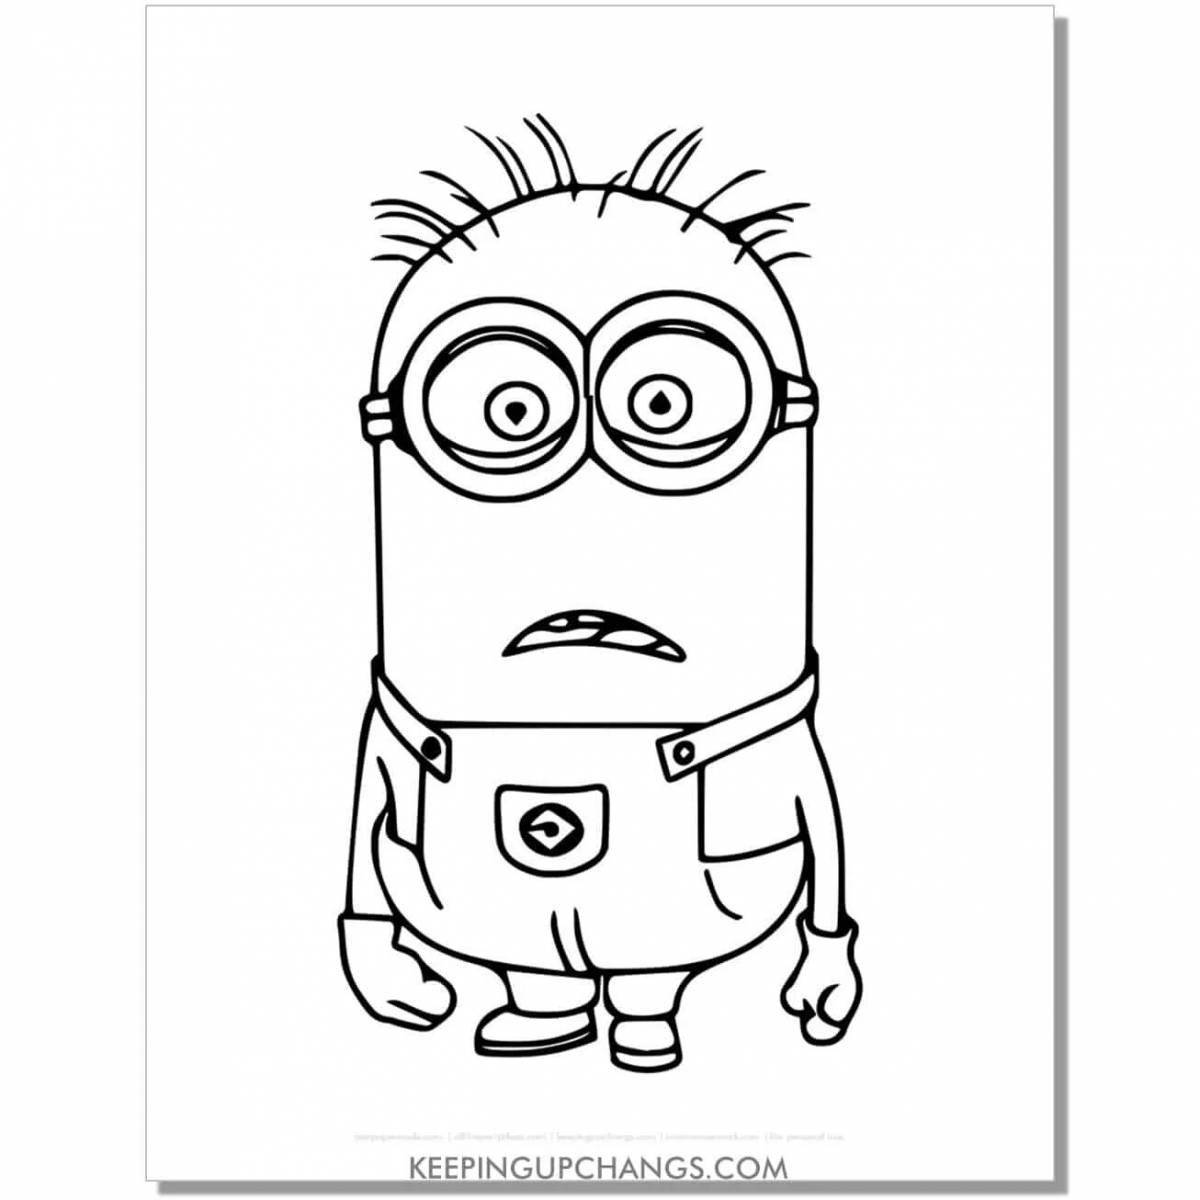 The incredible kevin the minion coloring book